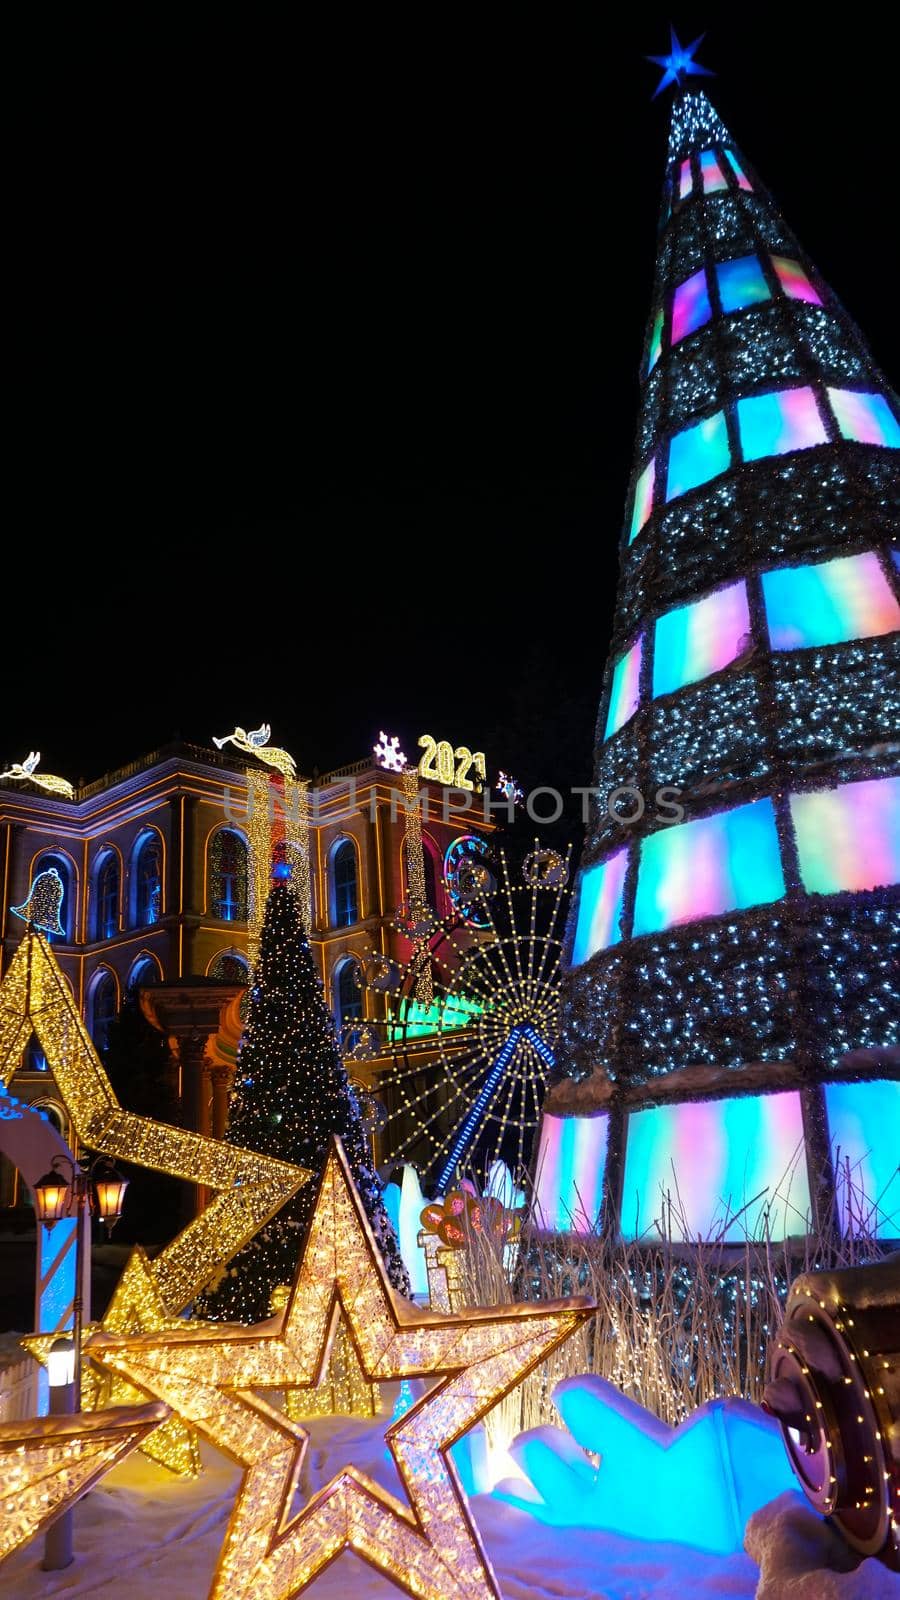 The city is decorated for Christmas and new year. Buildings, garlands, Christmas trees, fences and the square glow with different lights. People relax, enjoy the winter and holiday. Almaty, Kazakhstan